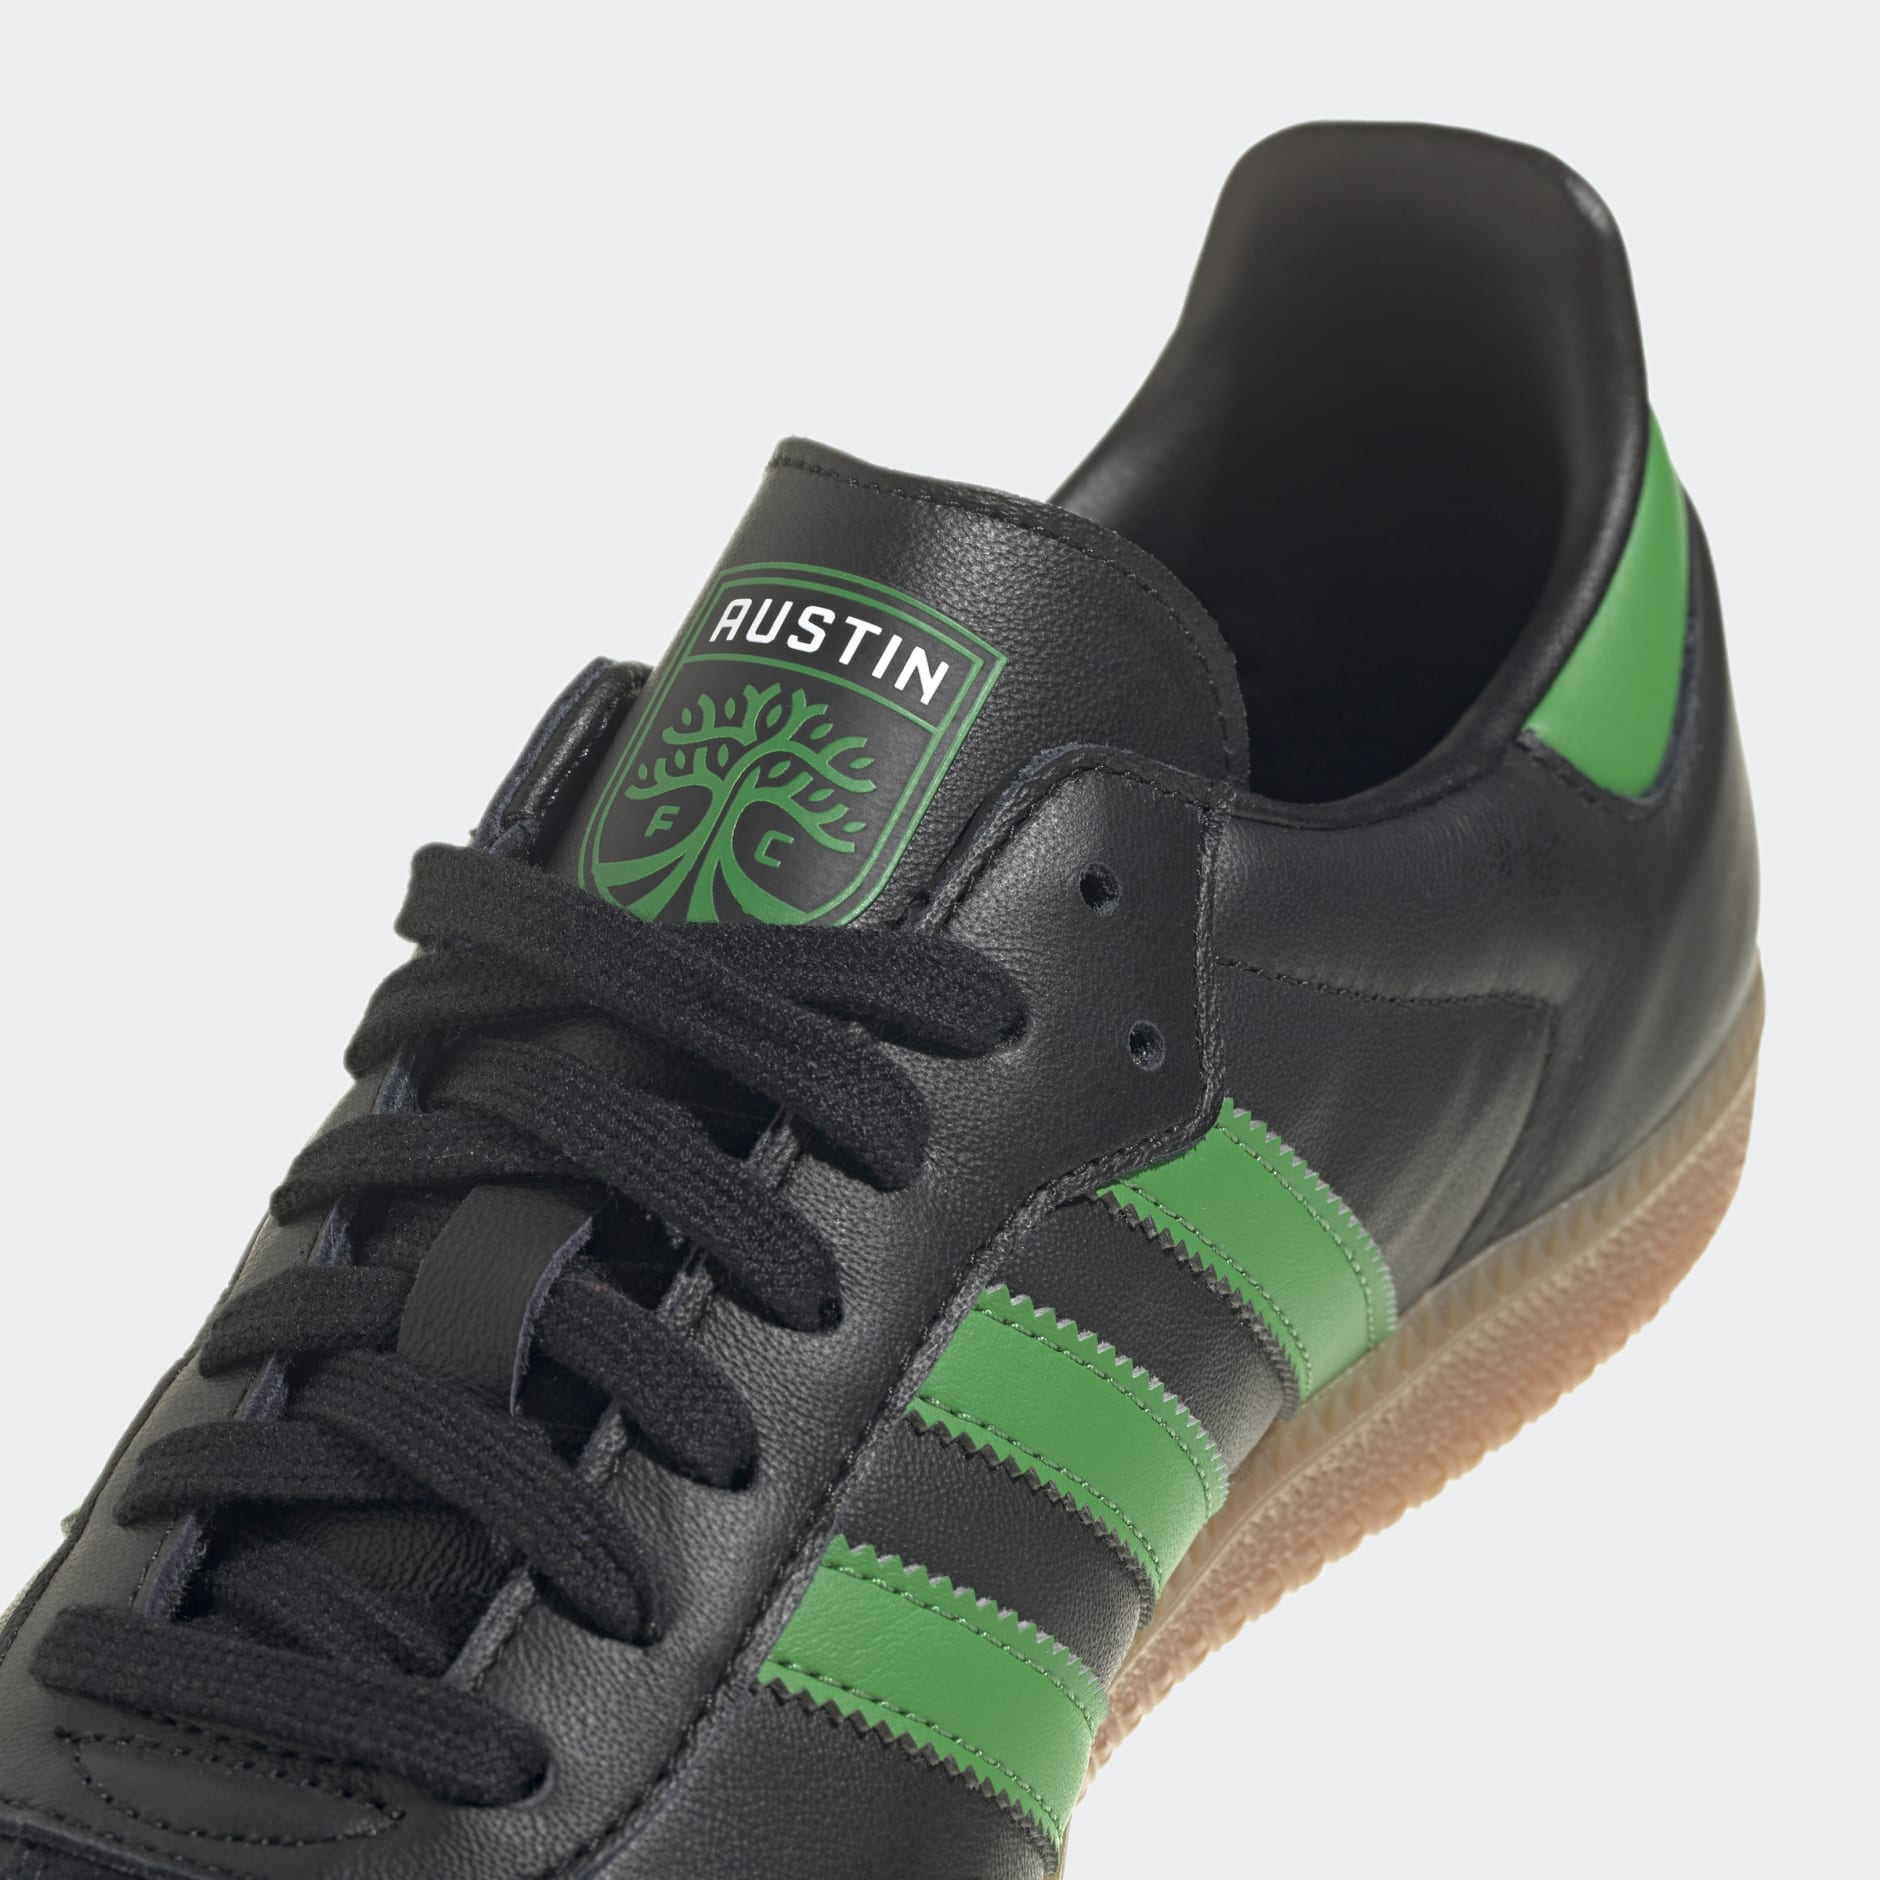 Ive been buying a variation of these shoes (always green stripes) since I  first heard My Adidas. Sometimes… | Adidas shoes outlet, Adidas superstar, Adidas  sneakers